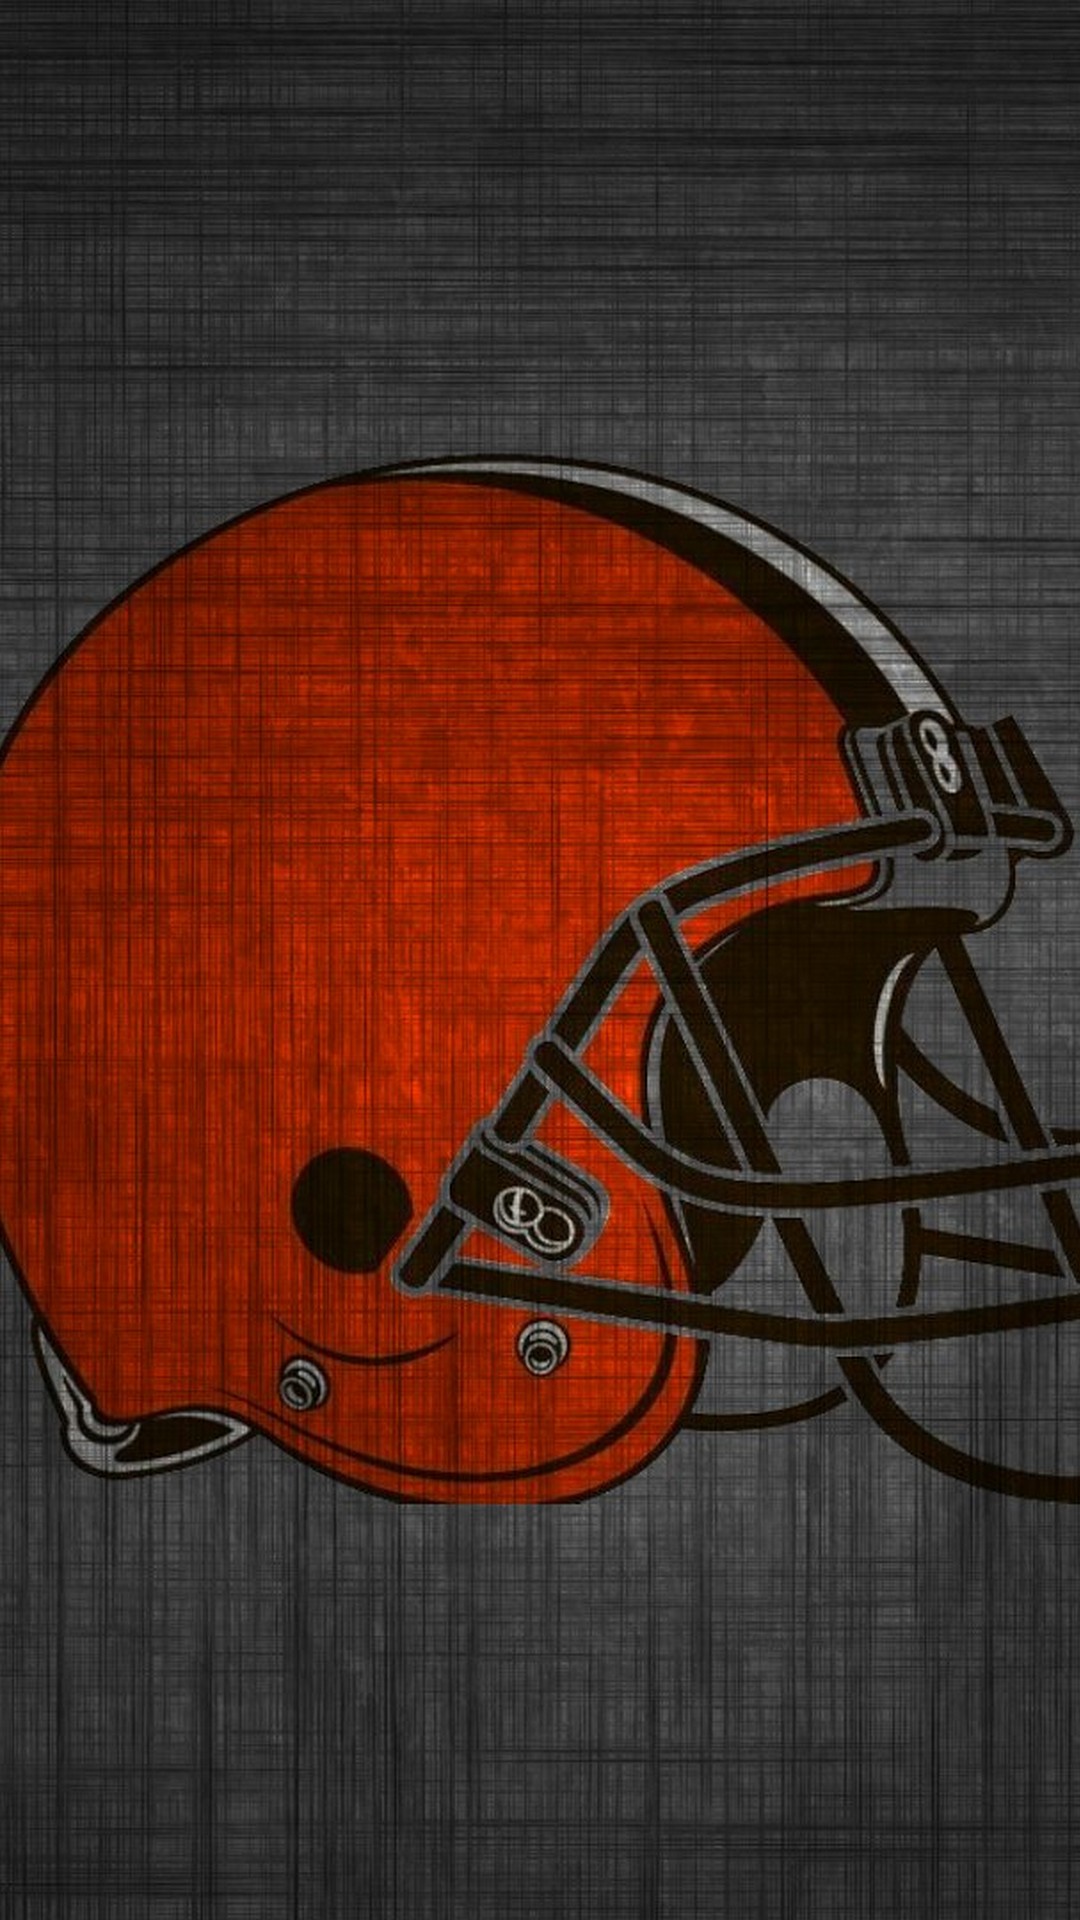 Cleveland Browns iPhone 6 Wallpaper With high-resolution 1080X1920 pixel. Download and set as wallpaper for Apple iPhone X, XS Max, XR, 8, 7, 6, SE, iPad, Android